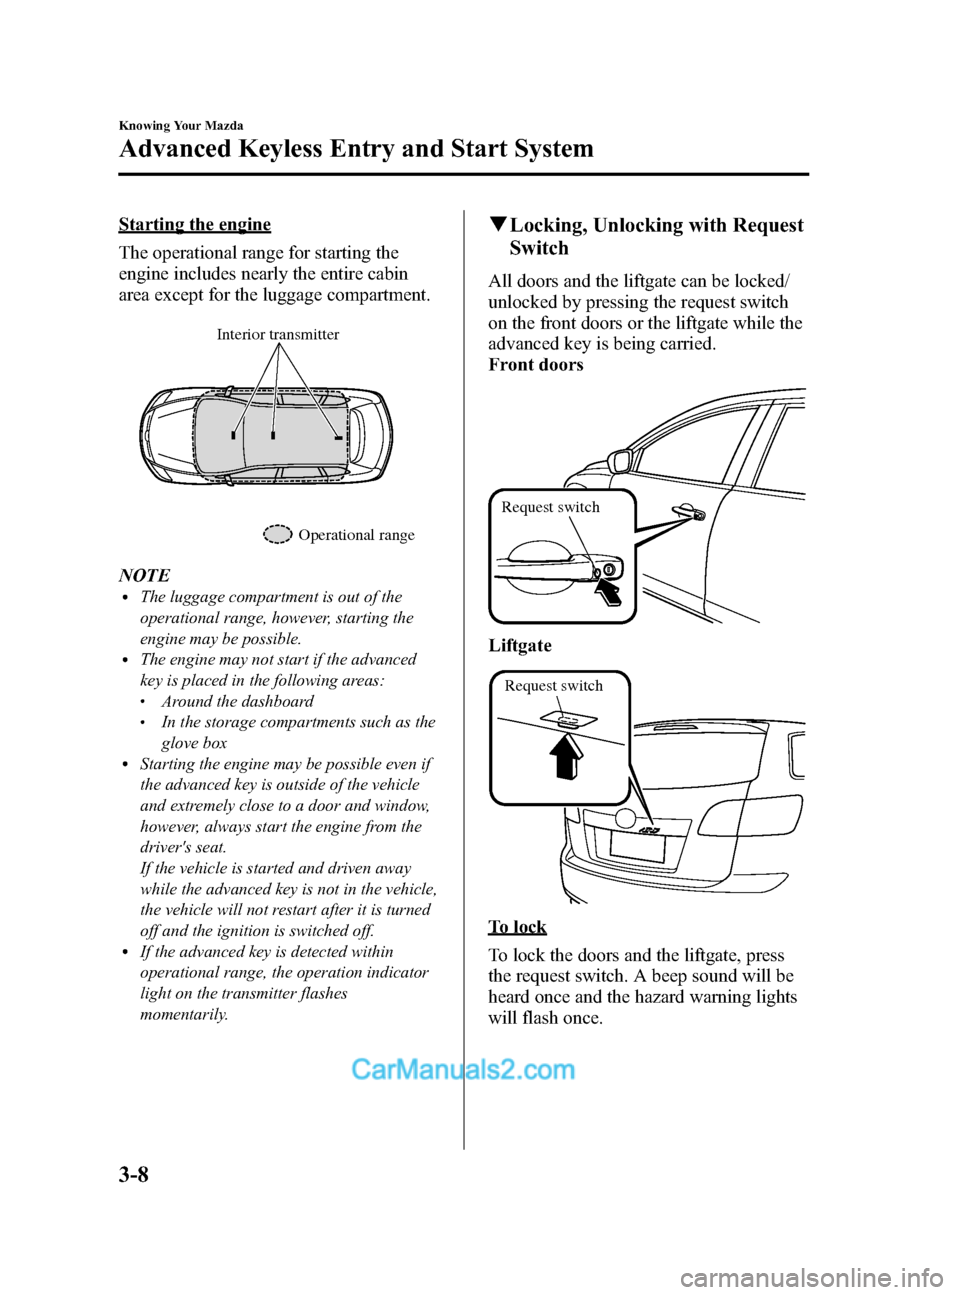 MAZDA MODEL CX-9 2014  Owners Manual (in English) Black plate (94,1)
Starting the engine
The operational range for starting the
engine includes nearly the entire cabin
area except for the luggage compartment.
Interior transmitterOperational range
NOT